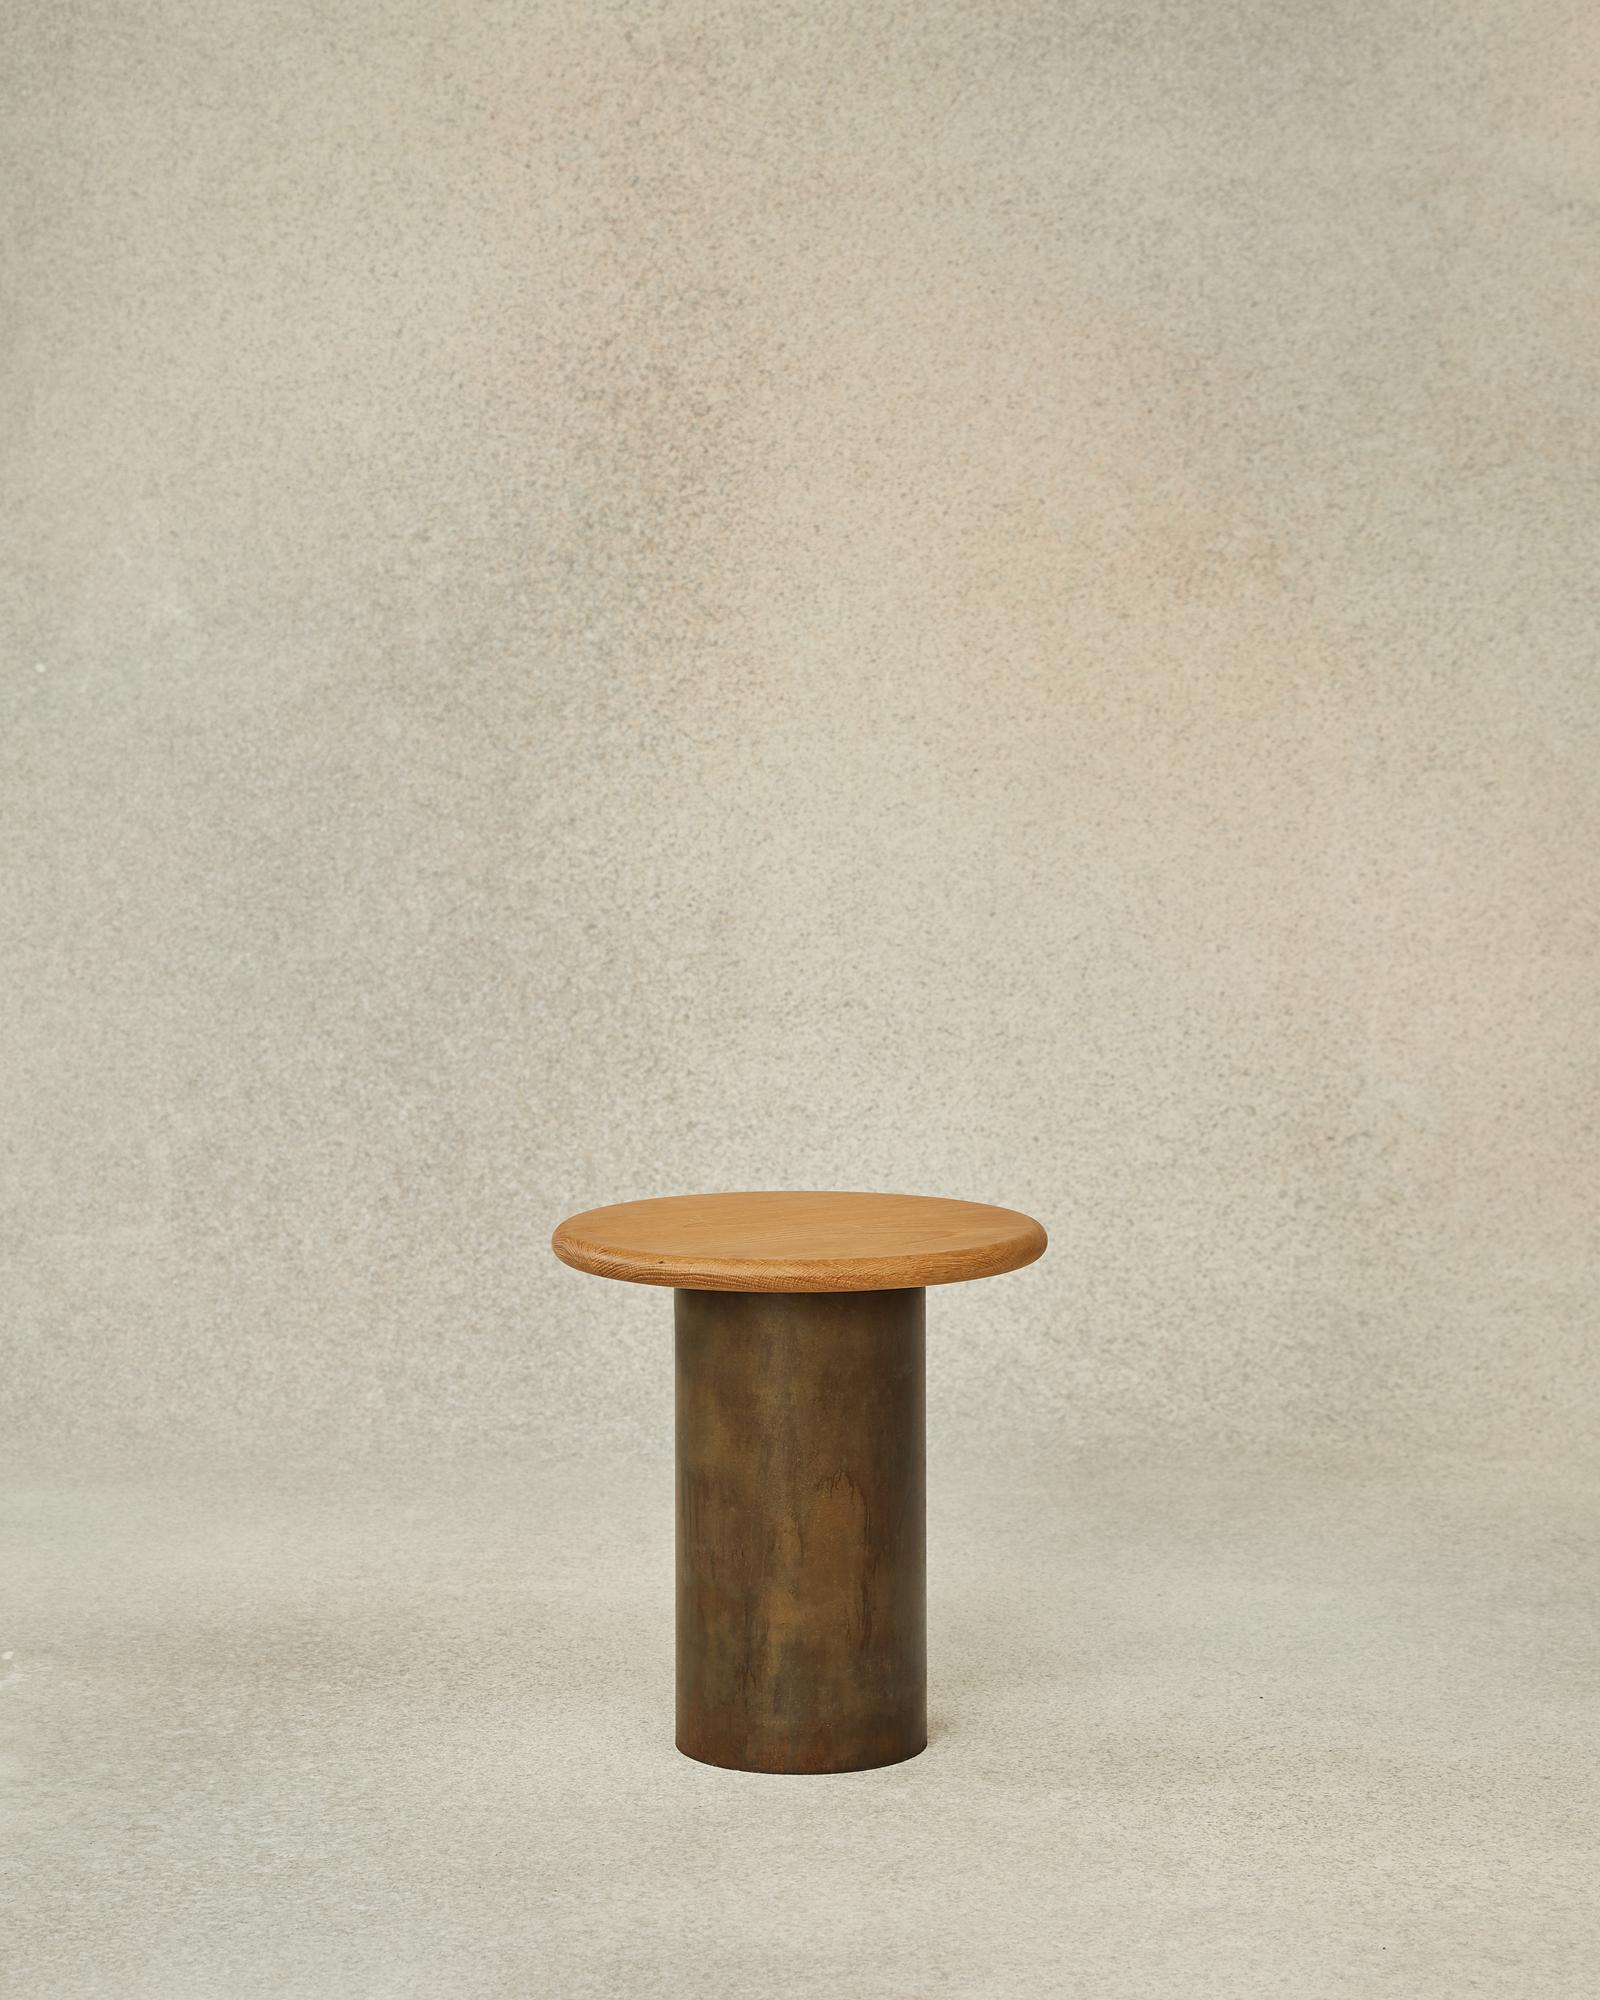 The Raindrop 400 is the second to smallest Side Table, perfect to pair with an 800 or 1000 Raindrop, and now available in a range of finishes to suit any interior or style. The raindrops nestle together to form a cascading series of tables in height